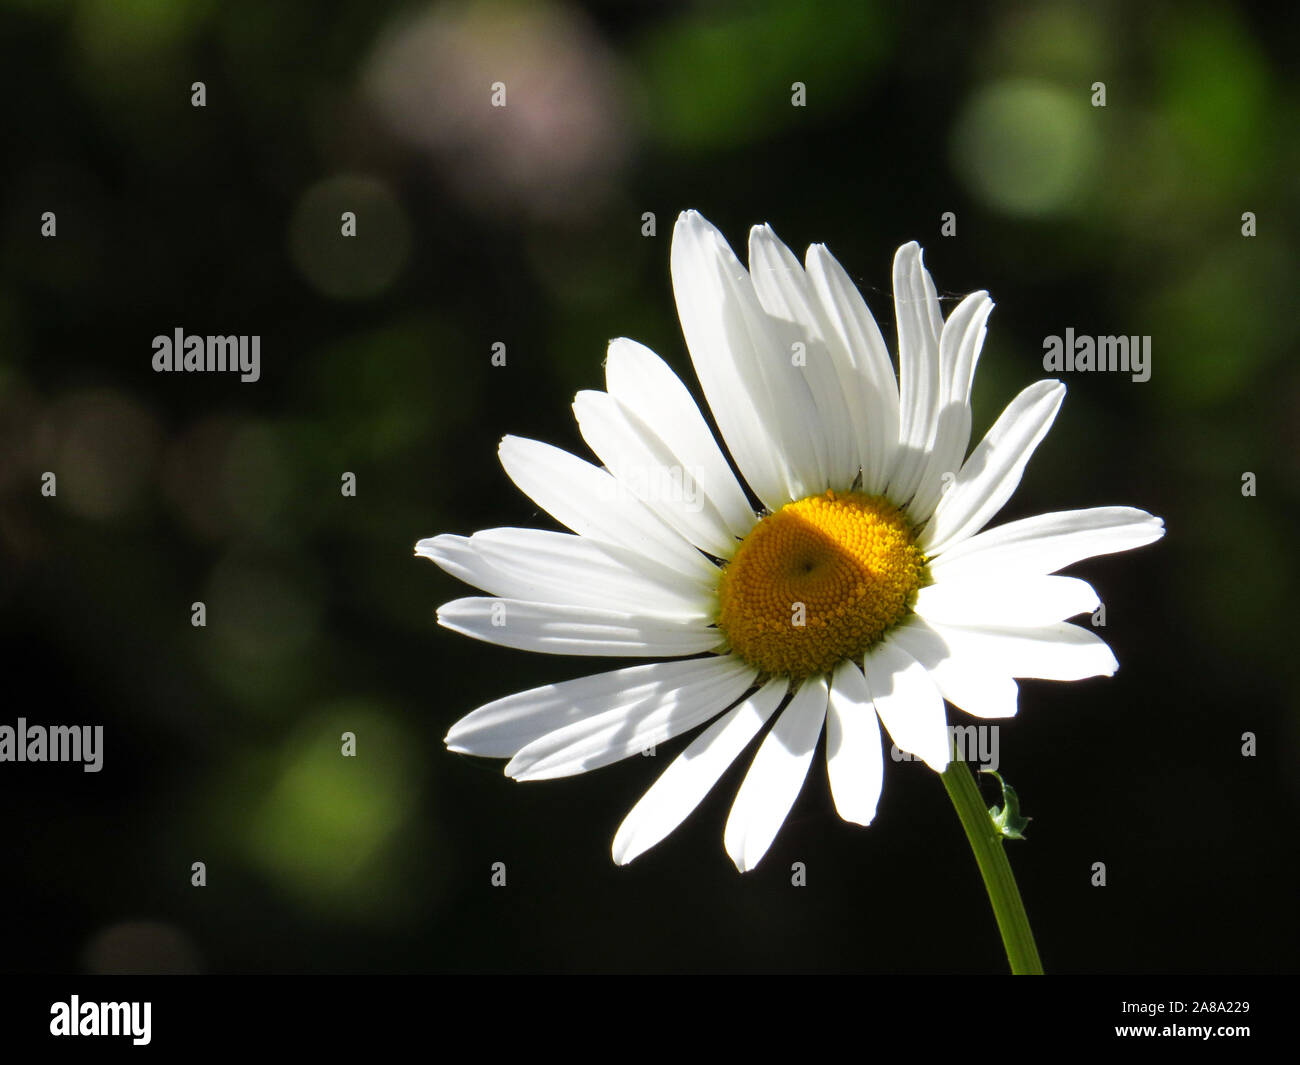 daisy with white petals in the sun Stock Photo